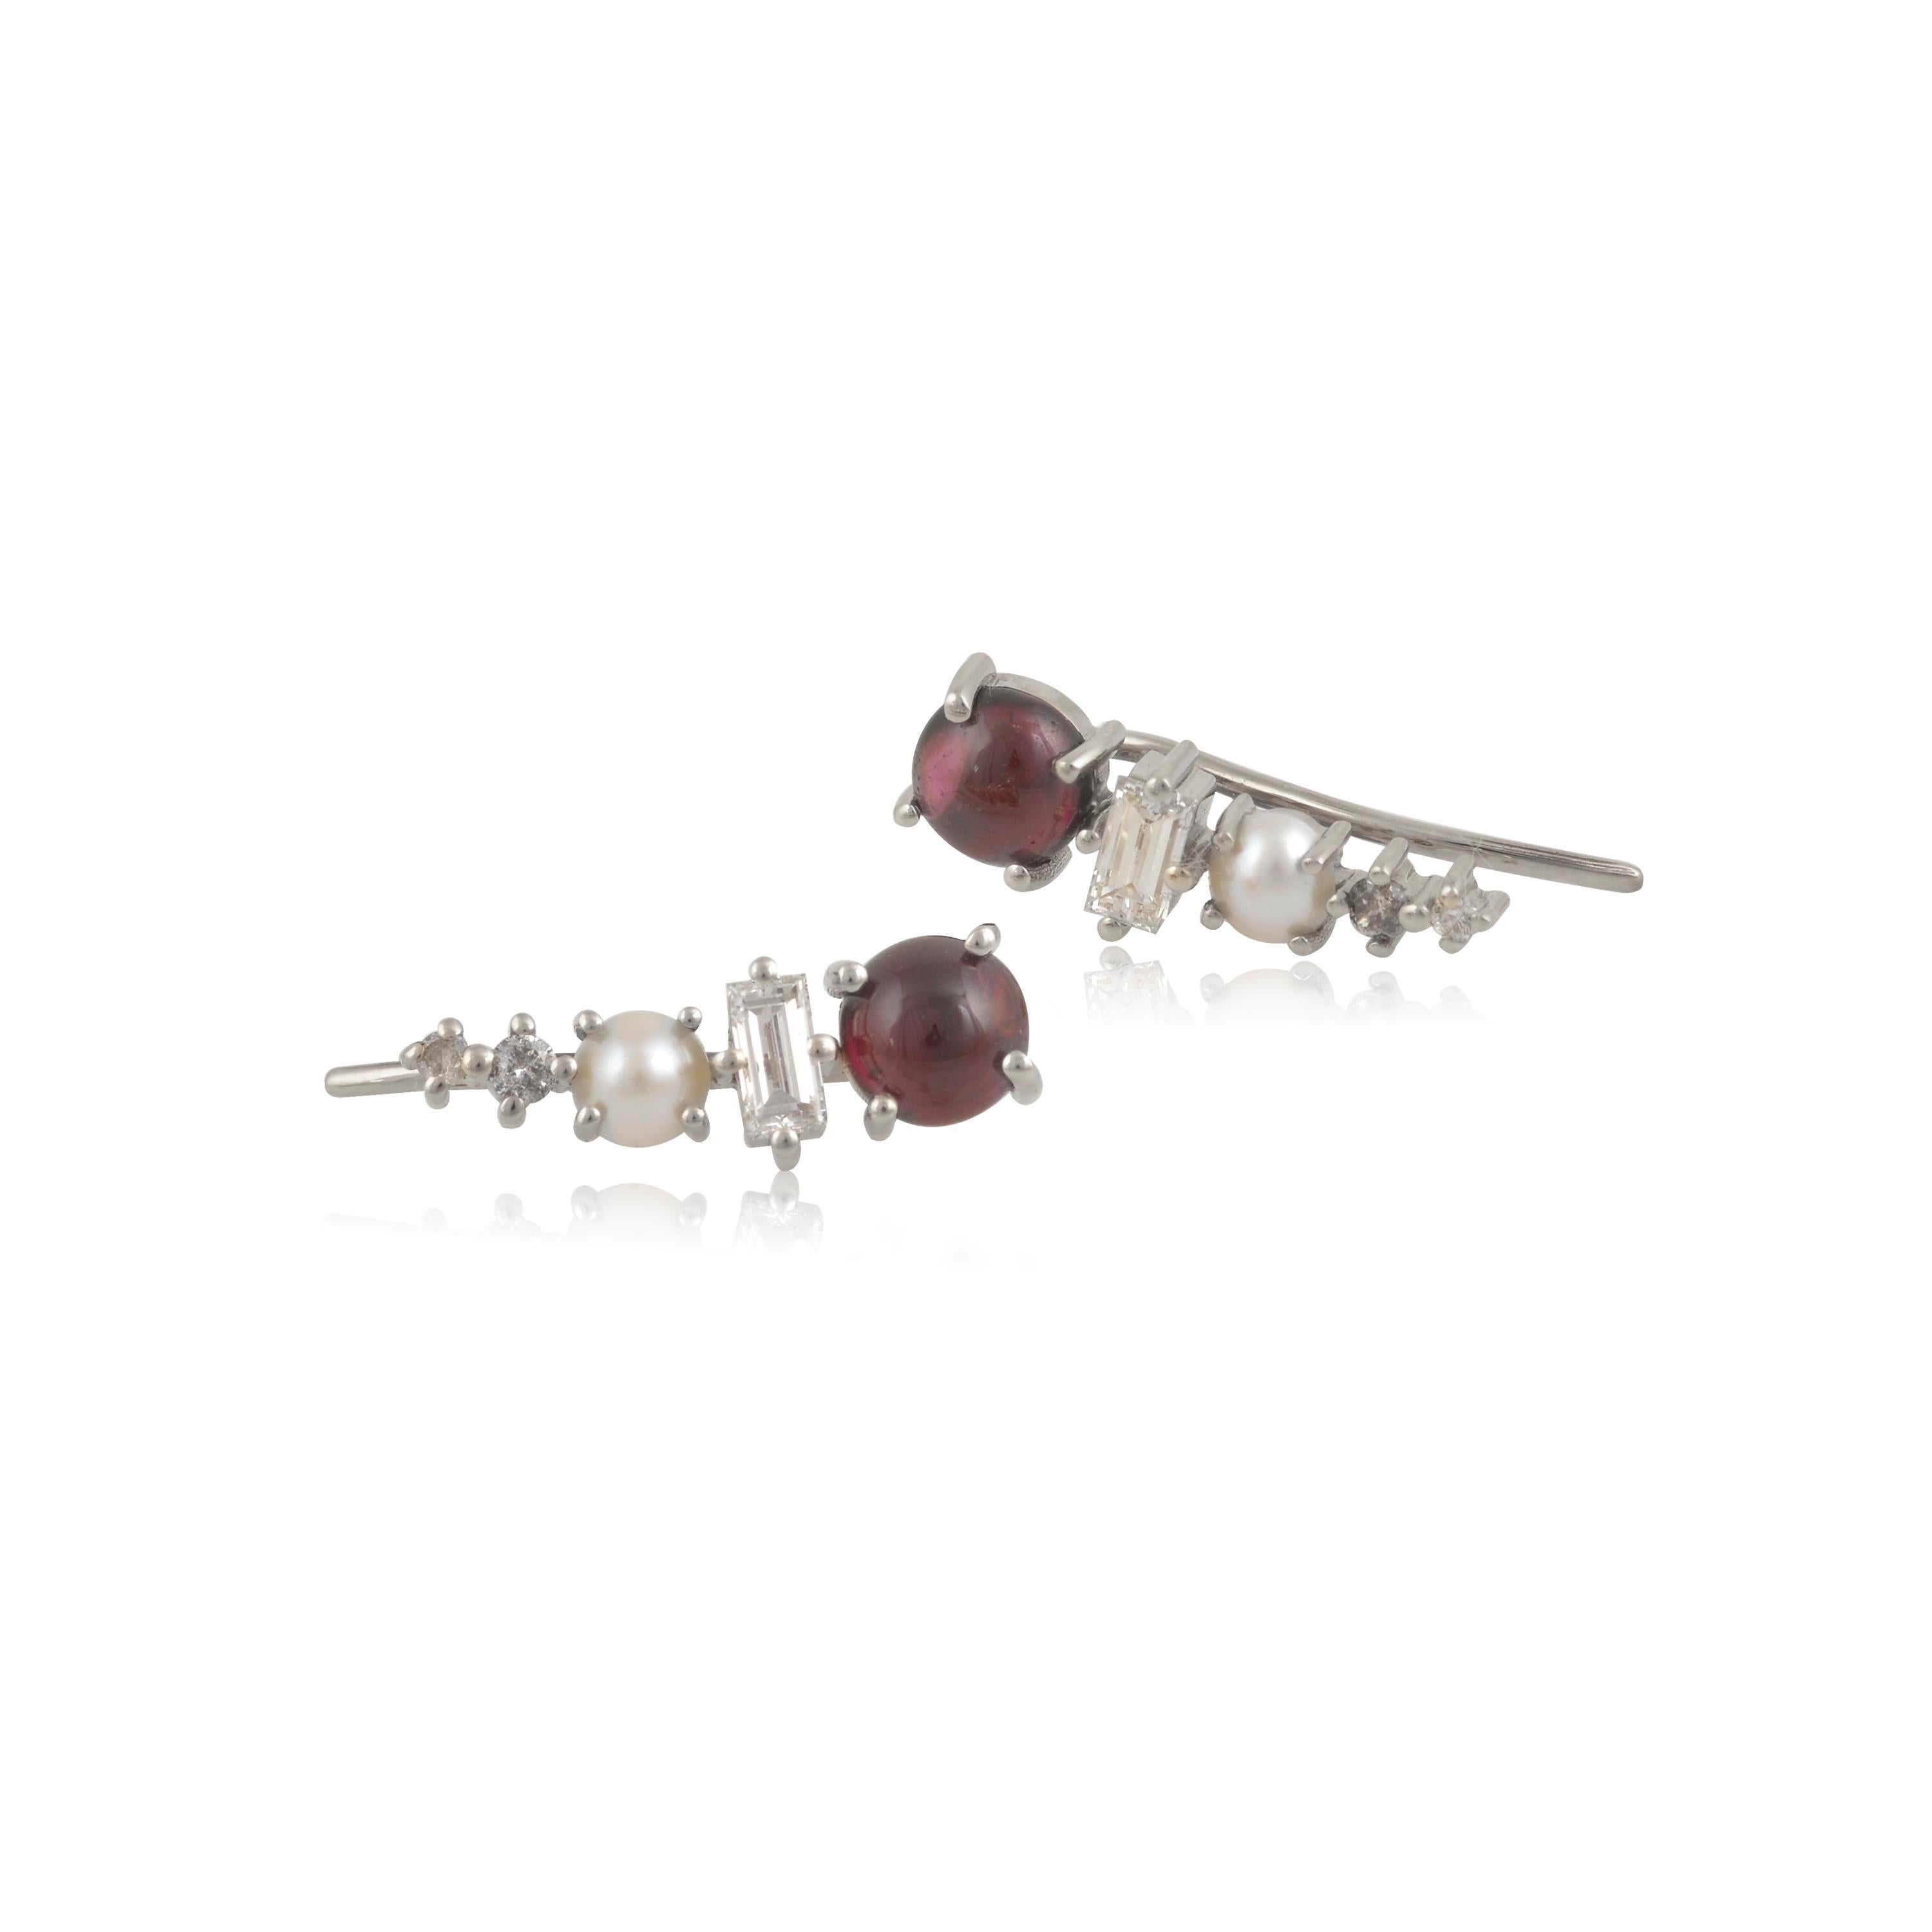 Designer: Alexia Gryllaki
Dimensions: L15x5mm
Weight: approximately 2.1g (pair)  
Barcode: OFS042

Multi-stone ear-climbers in 18 karat white gold with round cabochon rhodolite garnets approx. 1.32cts, round cabochon cultured pearls approx. 0.28cts,